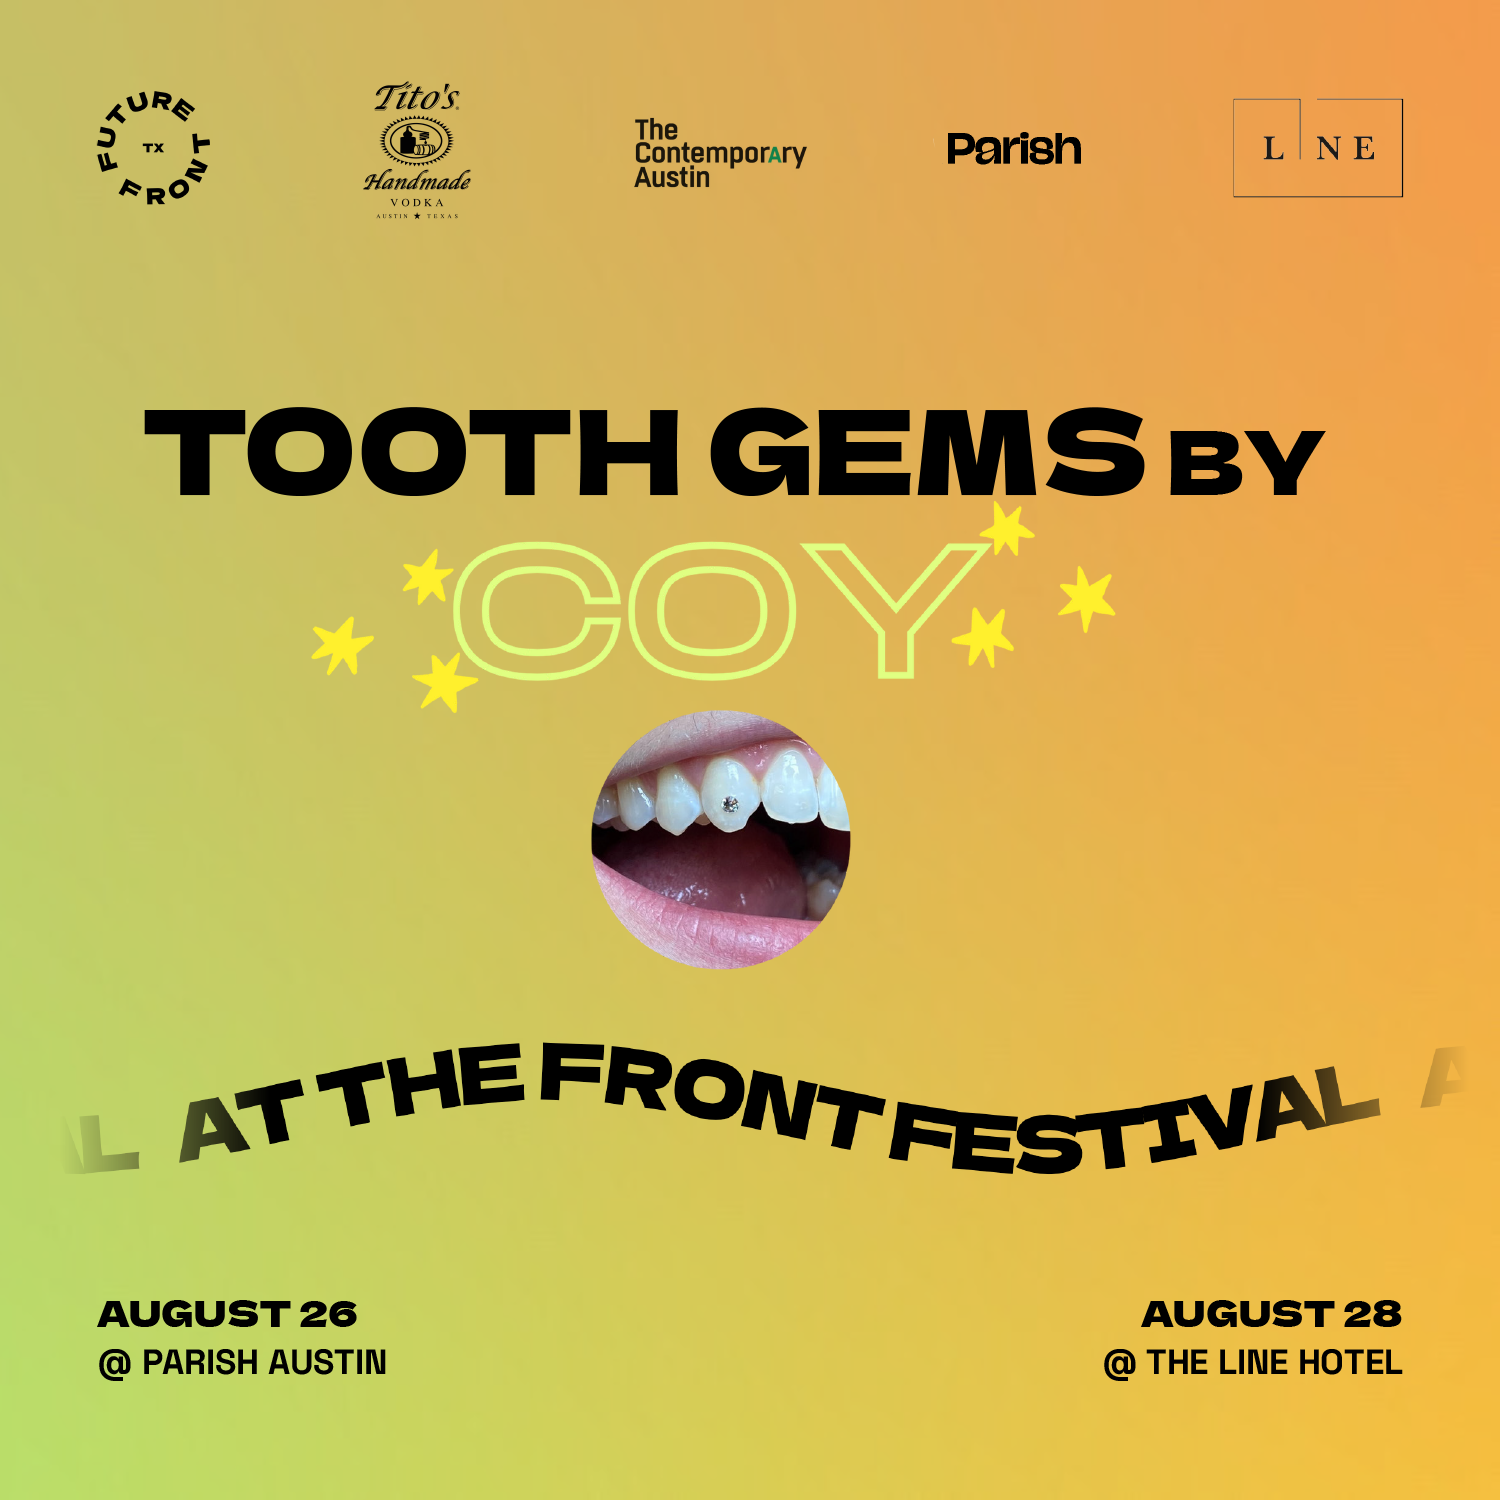 thefrontfest2022flyers-TOOTHGEMS-1.png